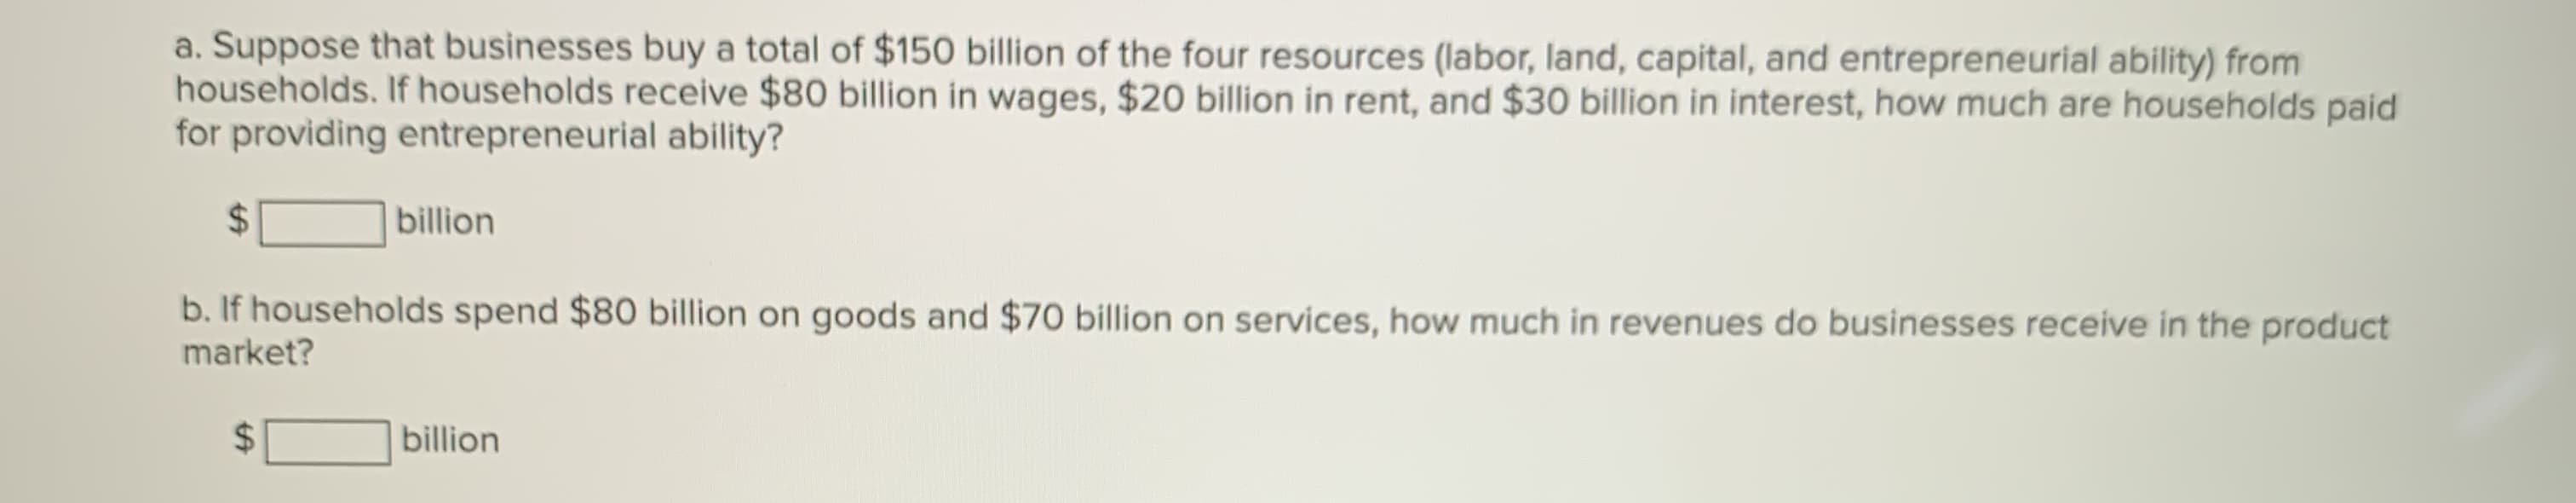 a. Suppose that businesses buy a total of $150 billion of the four resources (labor, land, capital, and entrepreneurial ability) from
households. If households receive $80 billion in wages, $20 billion in rent, and $30 billion in interest, how much are households paid
for providing entrepreneurial ability?
%24
billion
b. If households spend $80 billion on goods and $70 billion on services, how much in revenues do businesses receive in the product
market?
%24
billion
